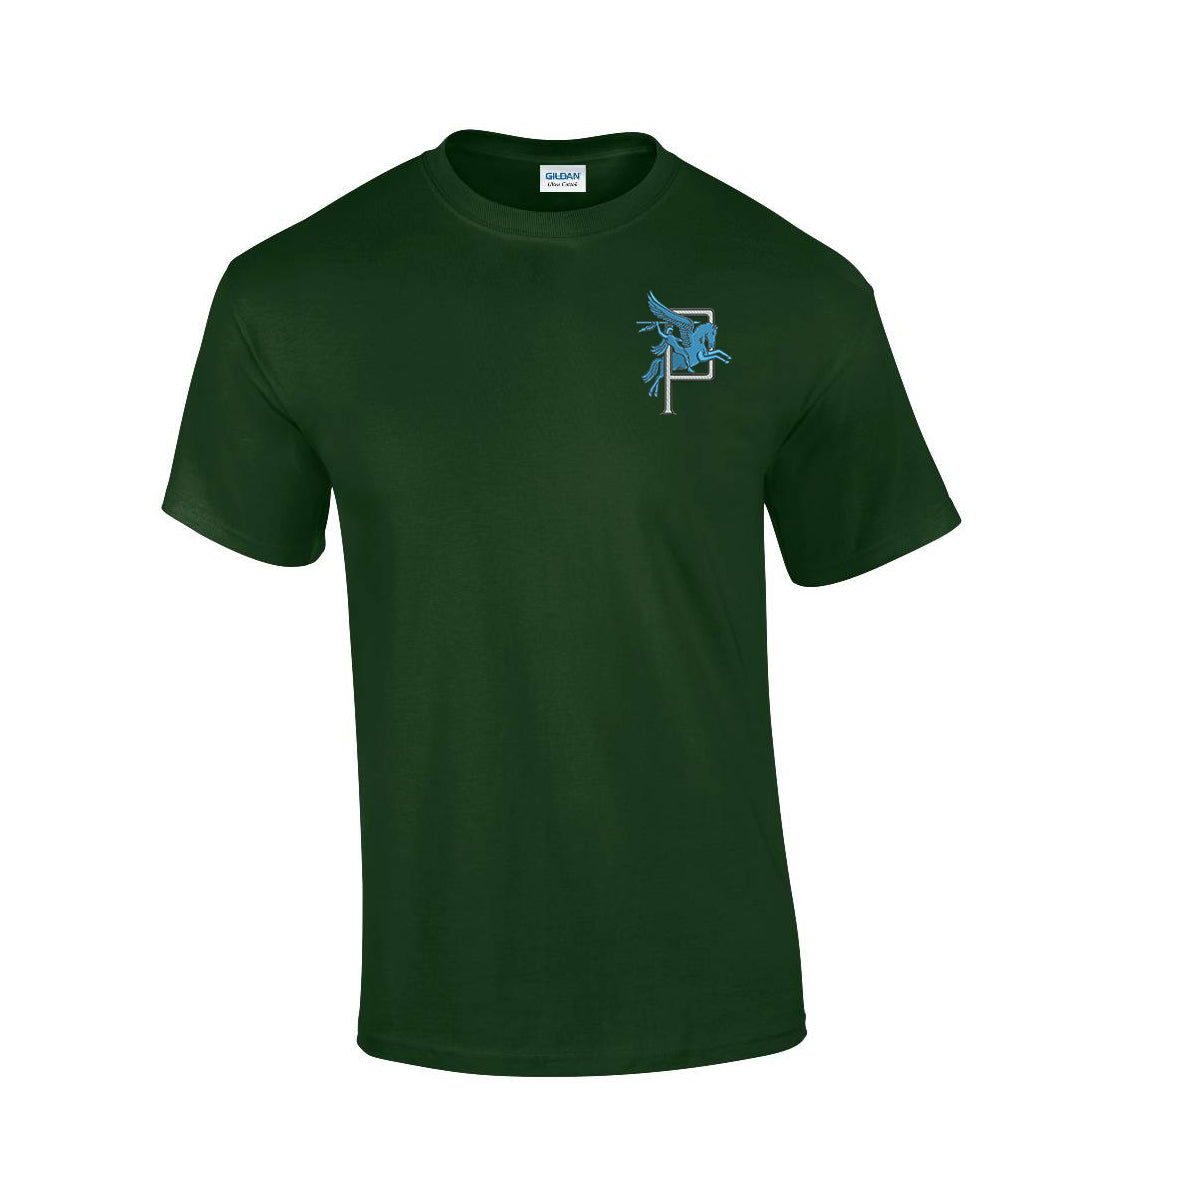 P-Company Premium Quality Embroidered T-Shirt - Bespoke Emerald Embroidery Ltd